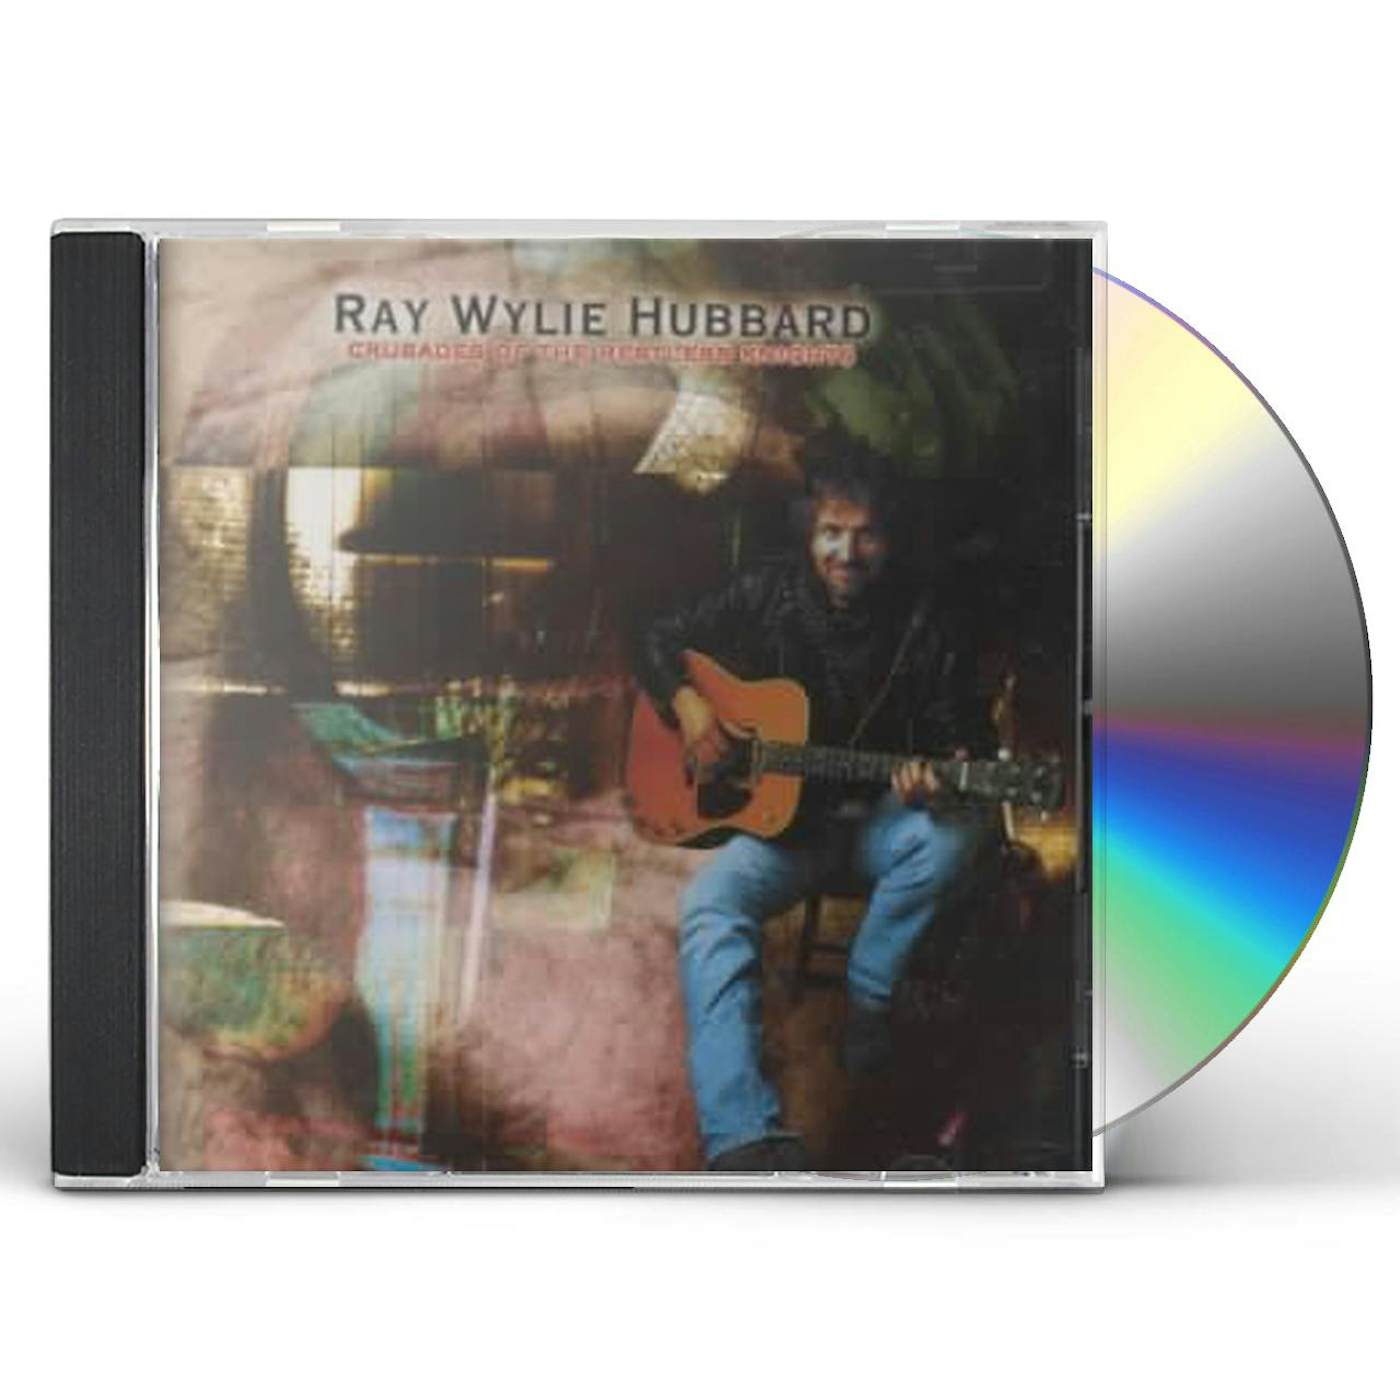 Ray Wylie Hubbard CRUSADES OF THE RESTLESS NIGHTS CD